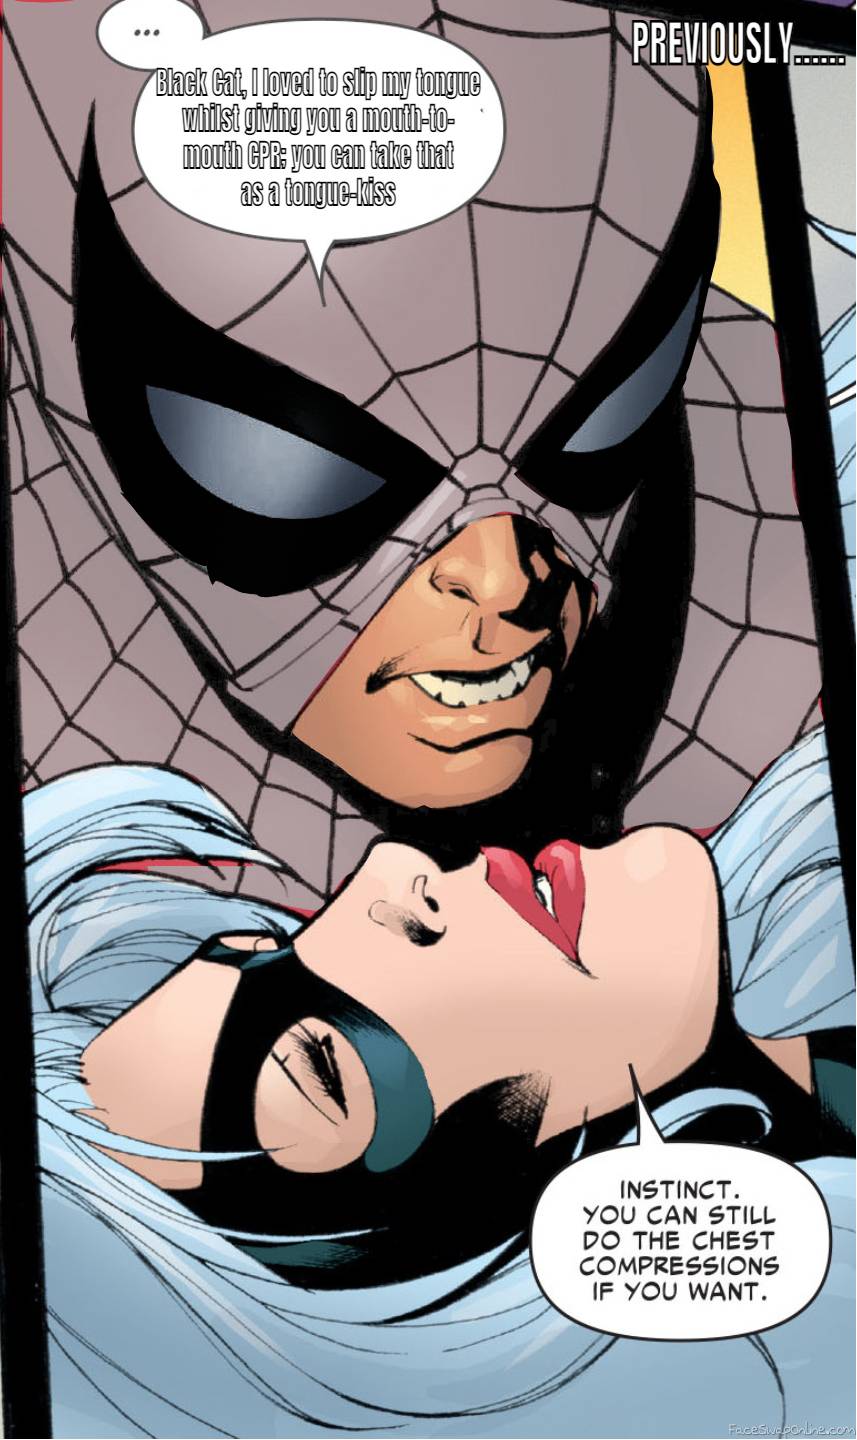 Spider-Man (Harry) and Black CAt